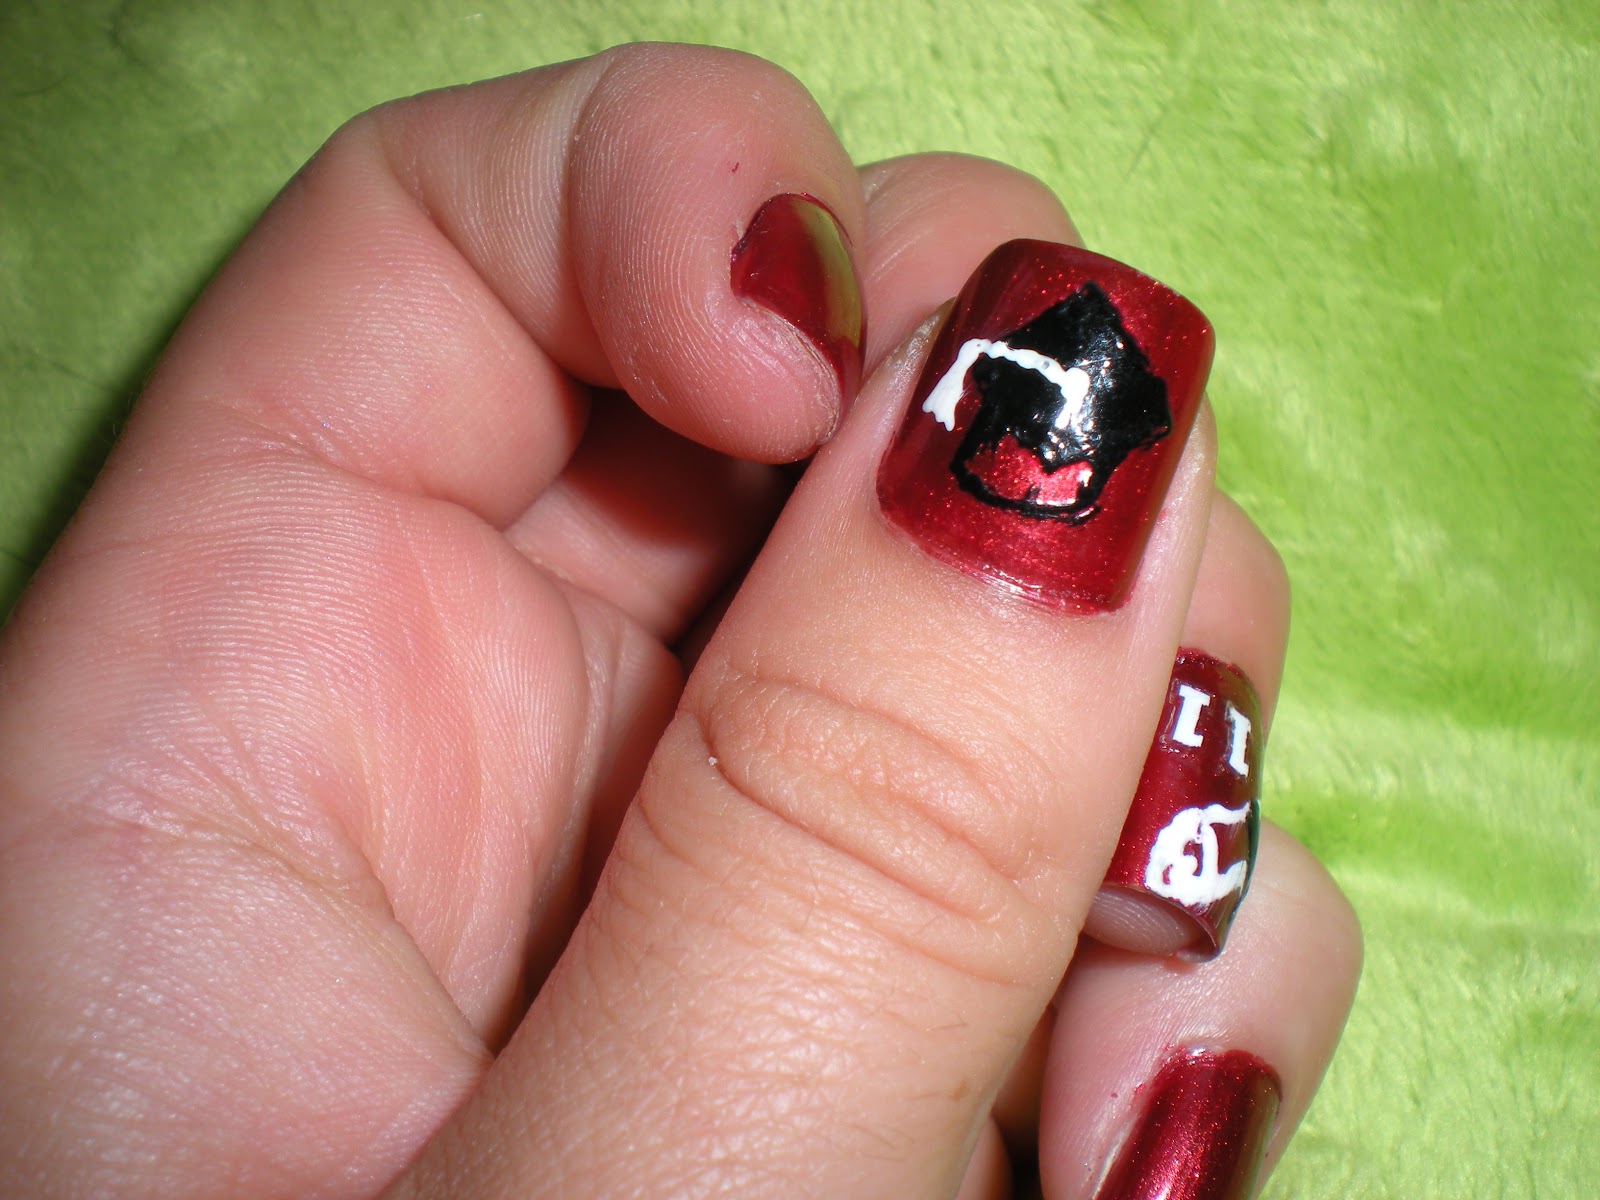 9. Graduation Nail Designs with Diploma - wide 7